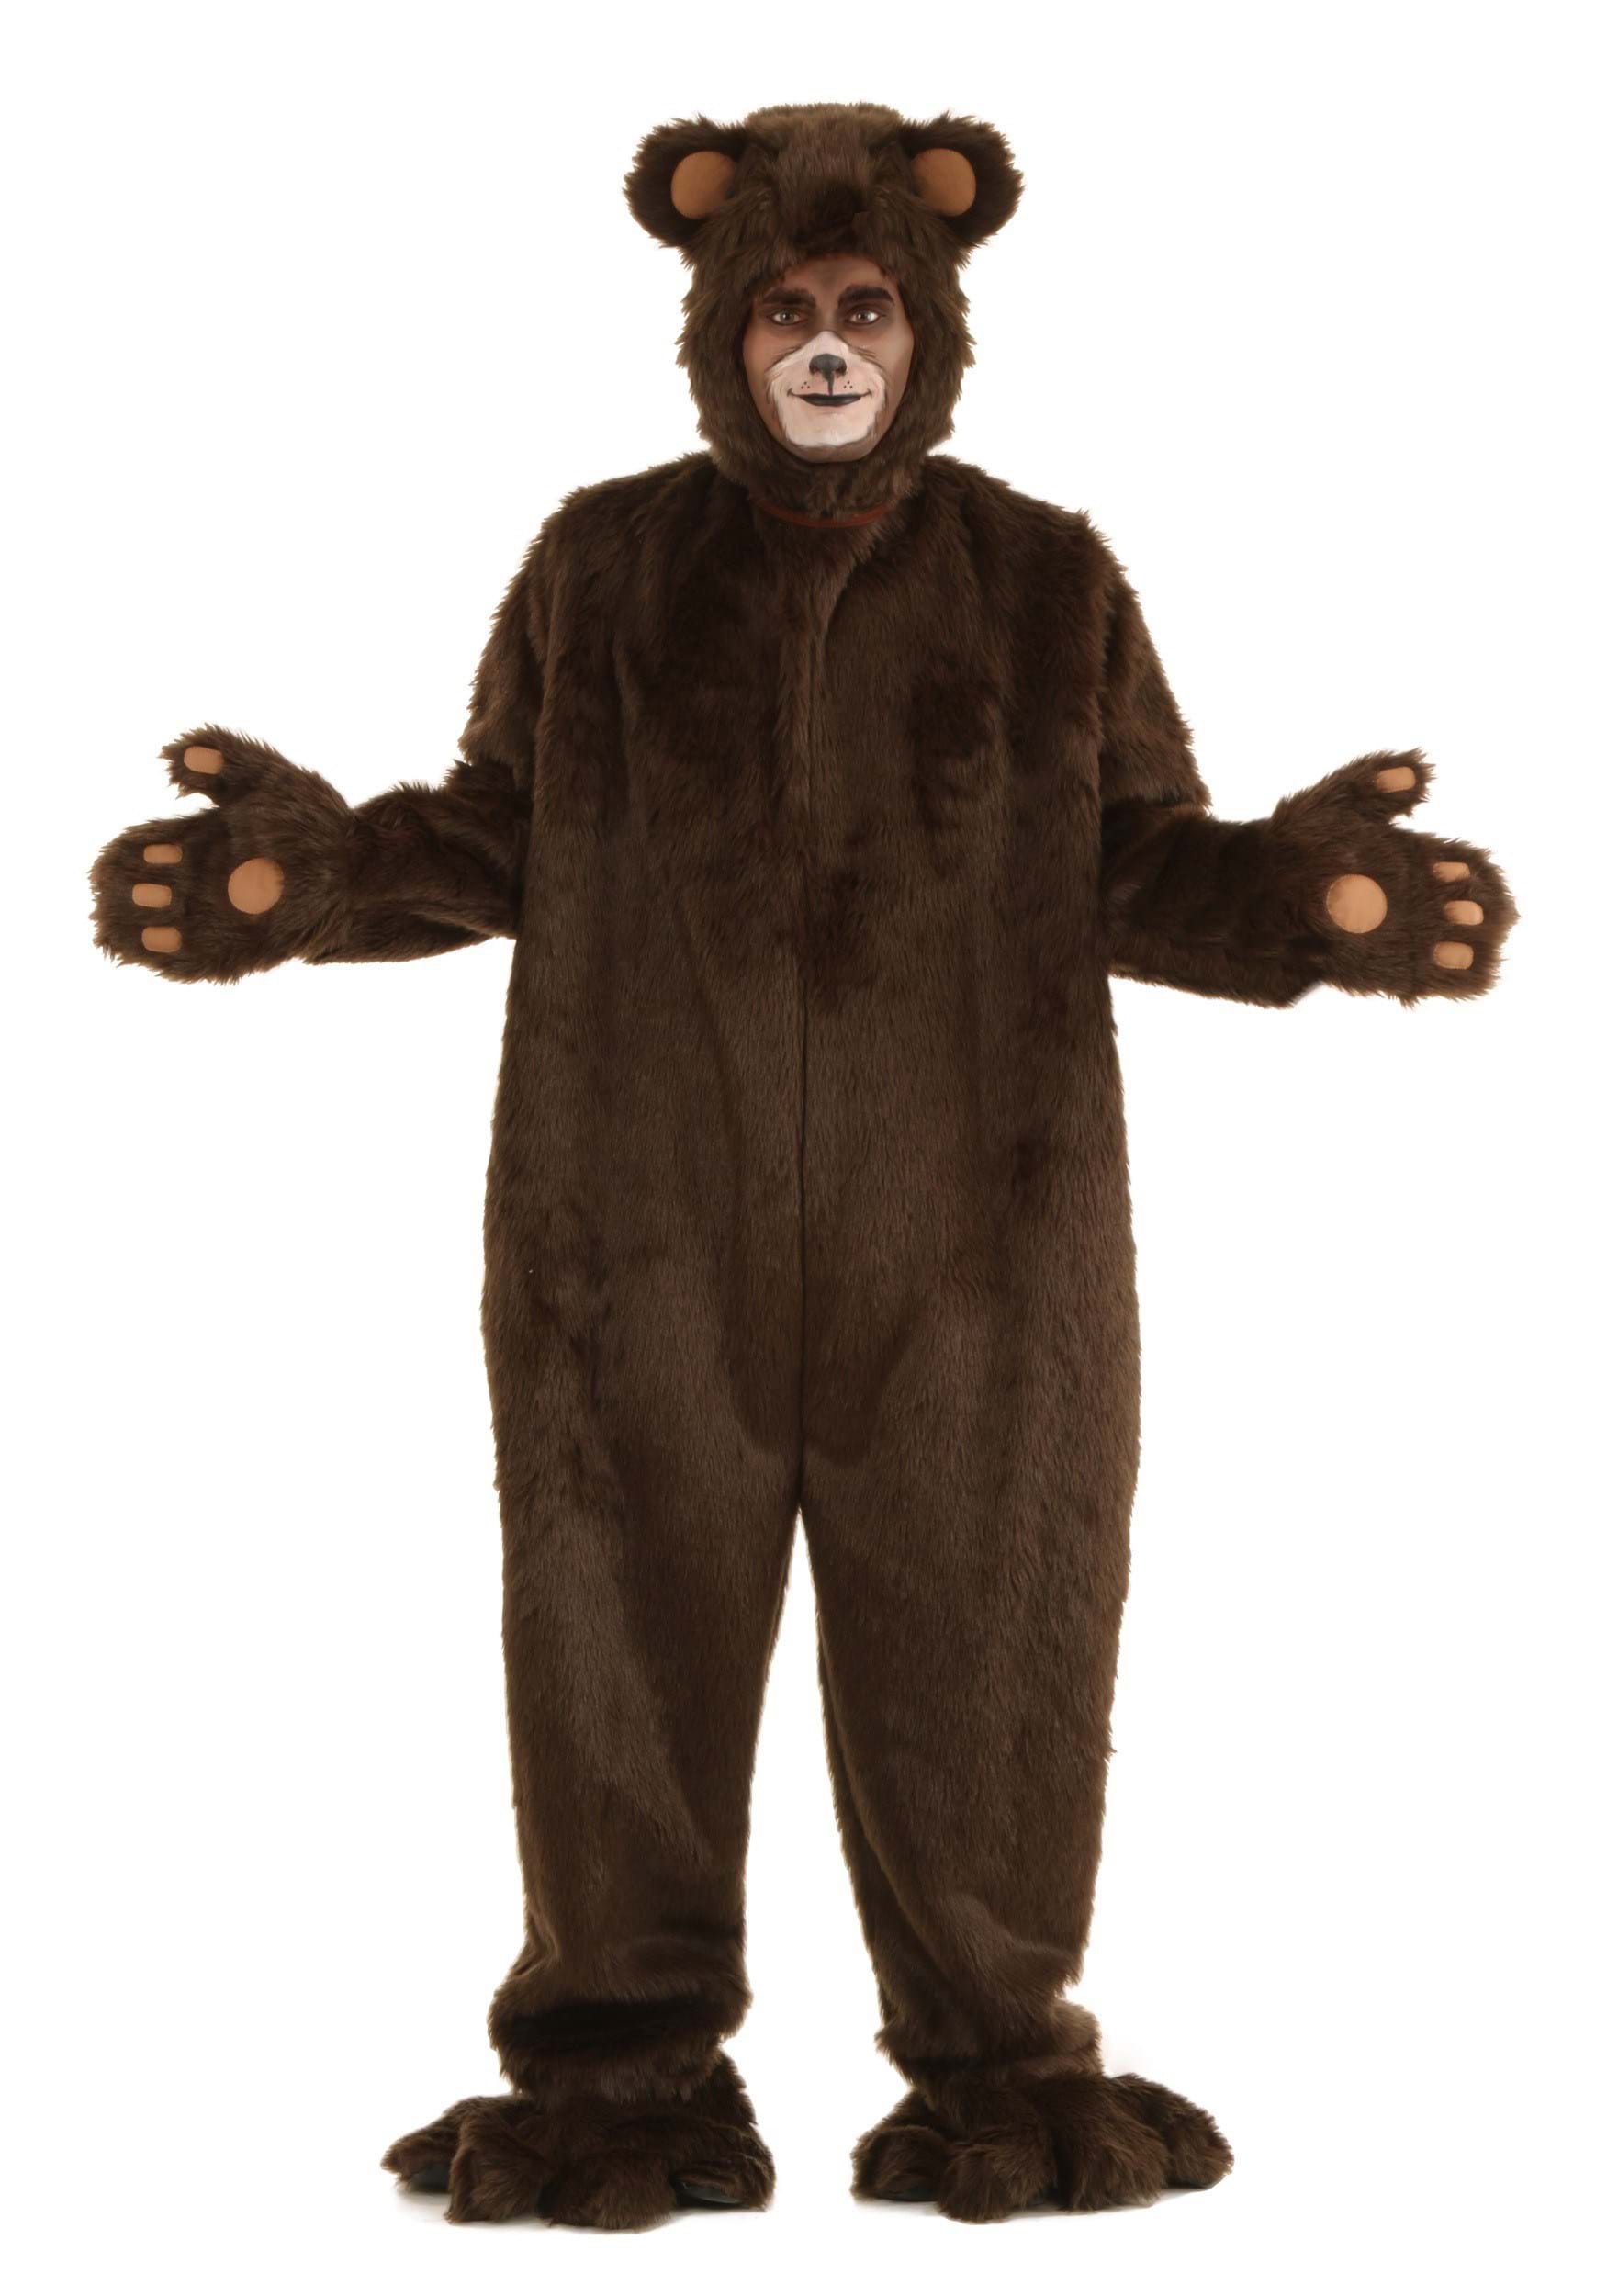 Photos - Fancy Dress Deluxe FUN Costumes Plus Size  Furry Brown Bear Adult Costume 